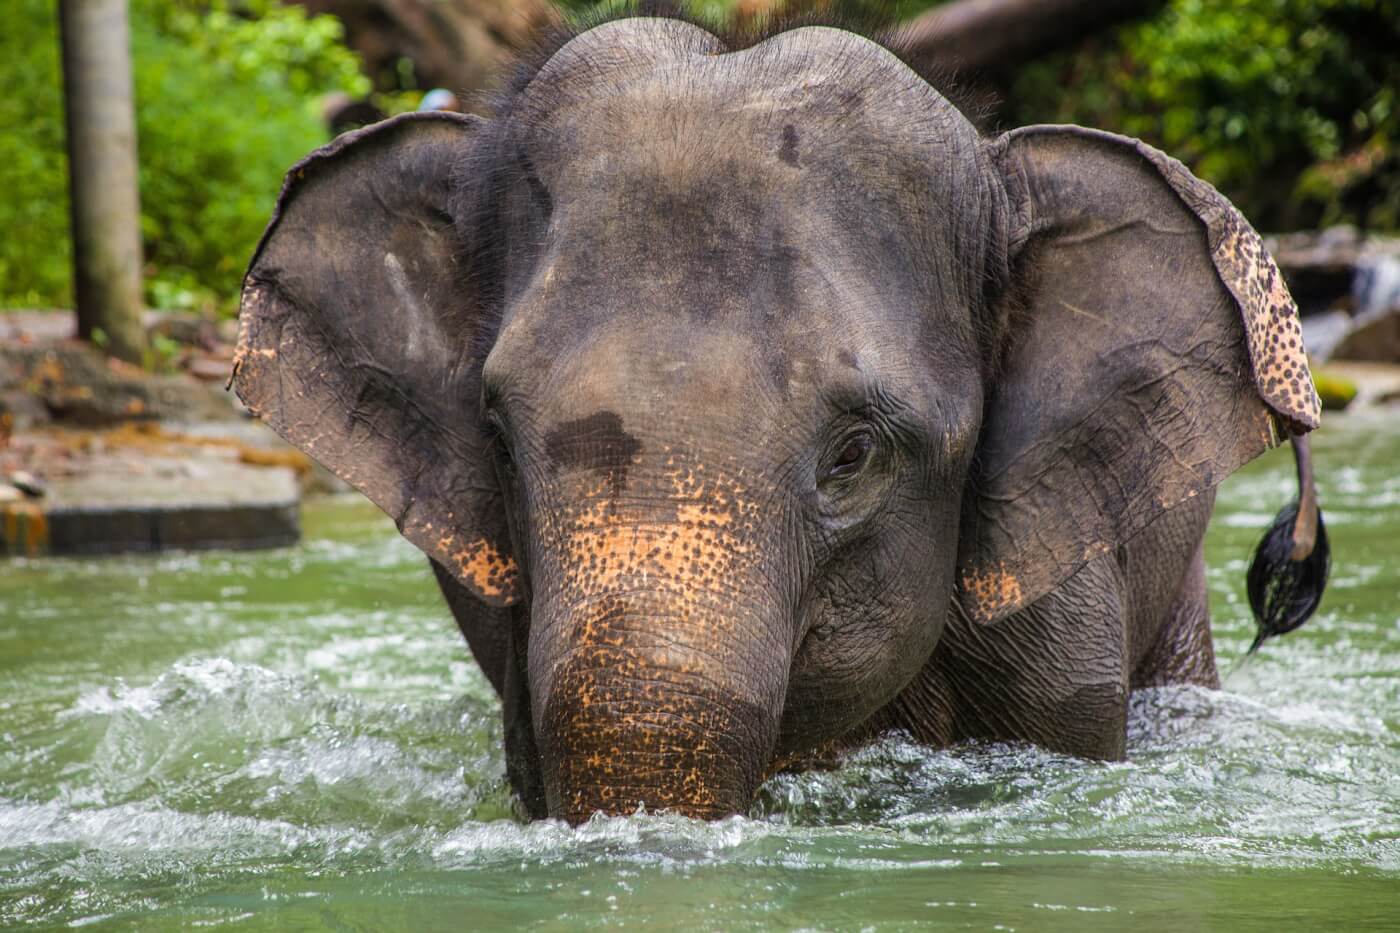 Tour Guide Trampled to Death After Tourist Yanks Elephant’s Tail